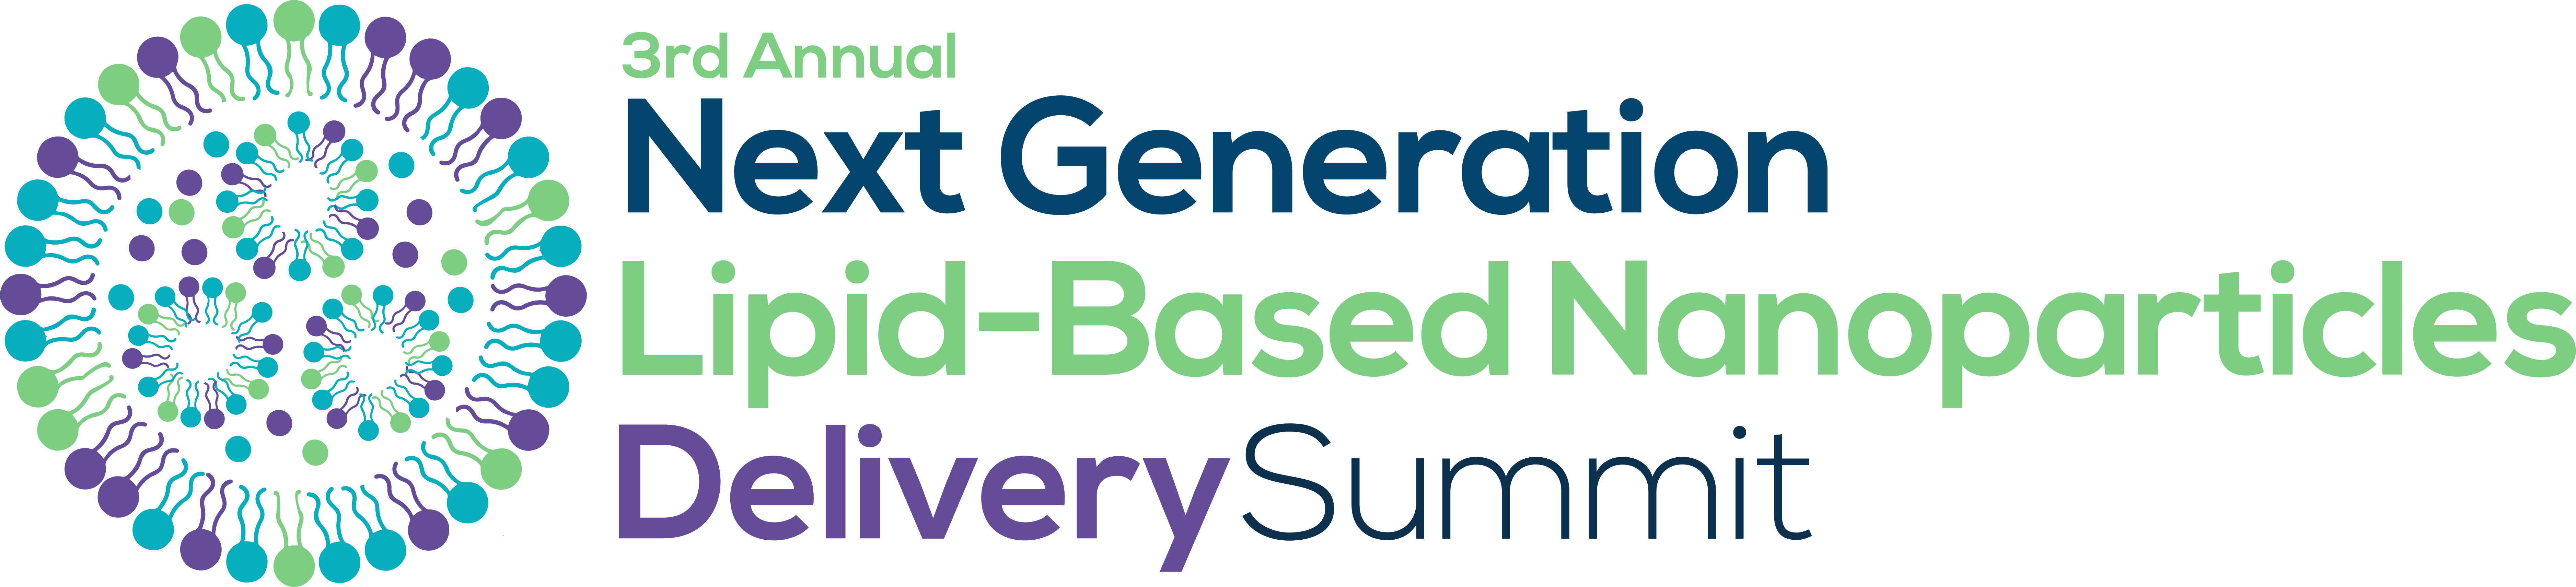 3rd Next Generation Lipid-Based Nanoparticles Delivery Summit logo (1)